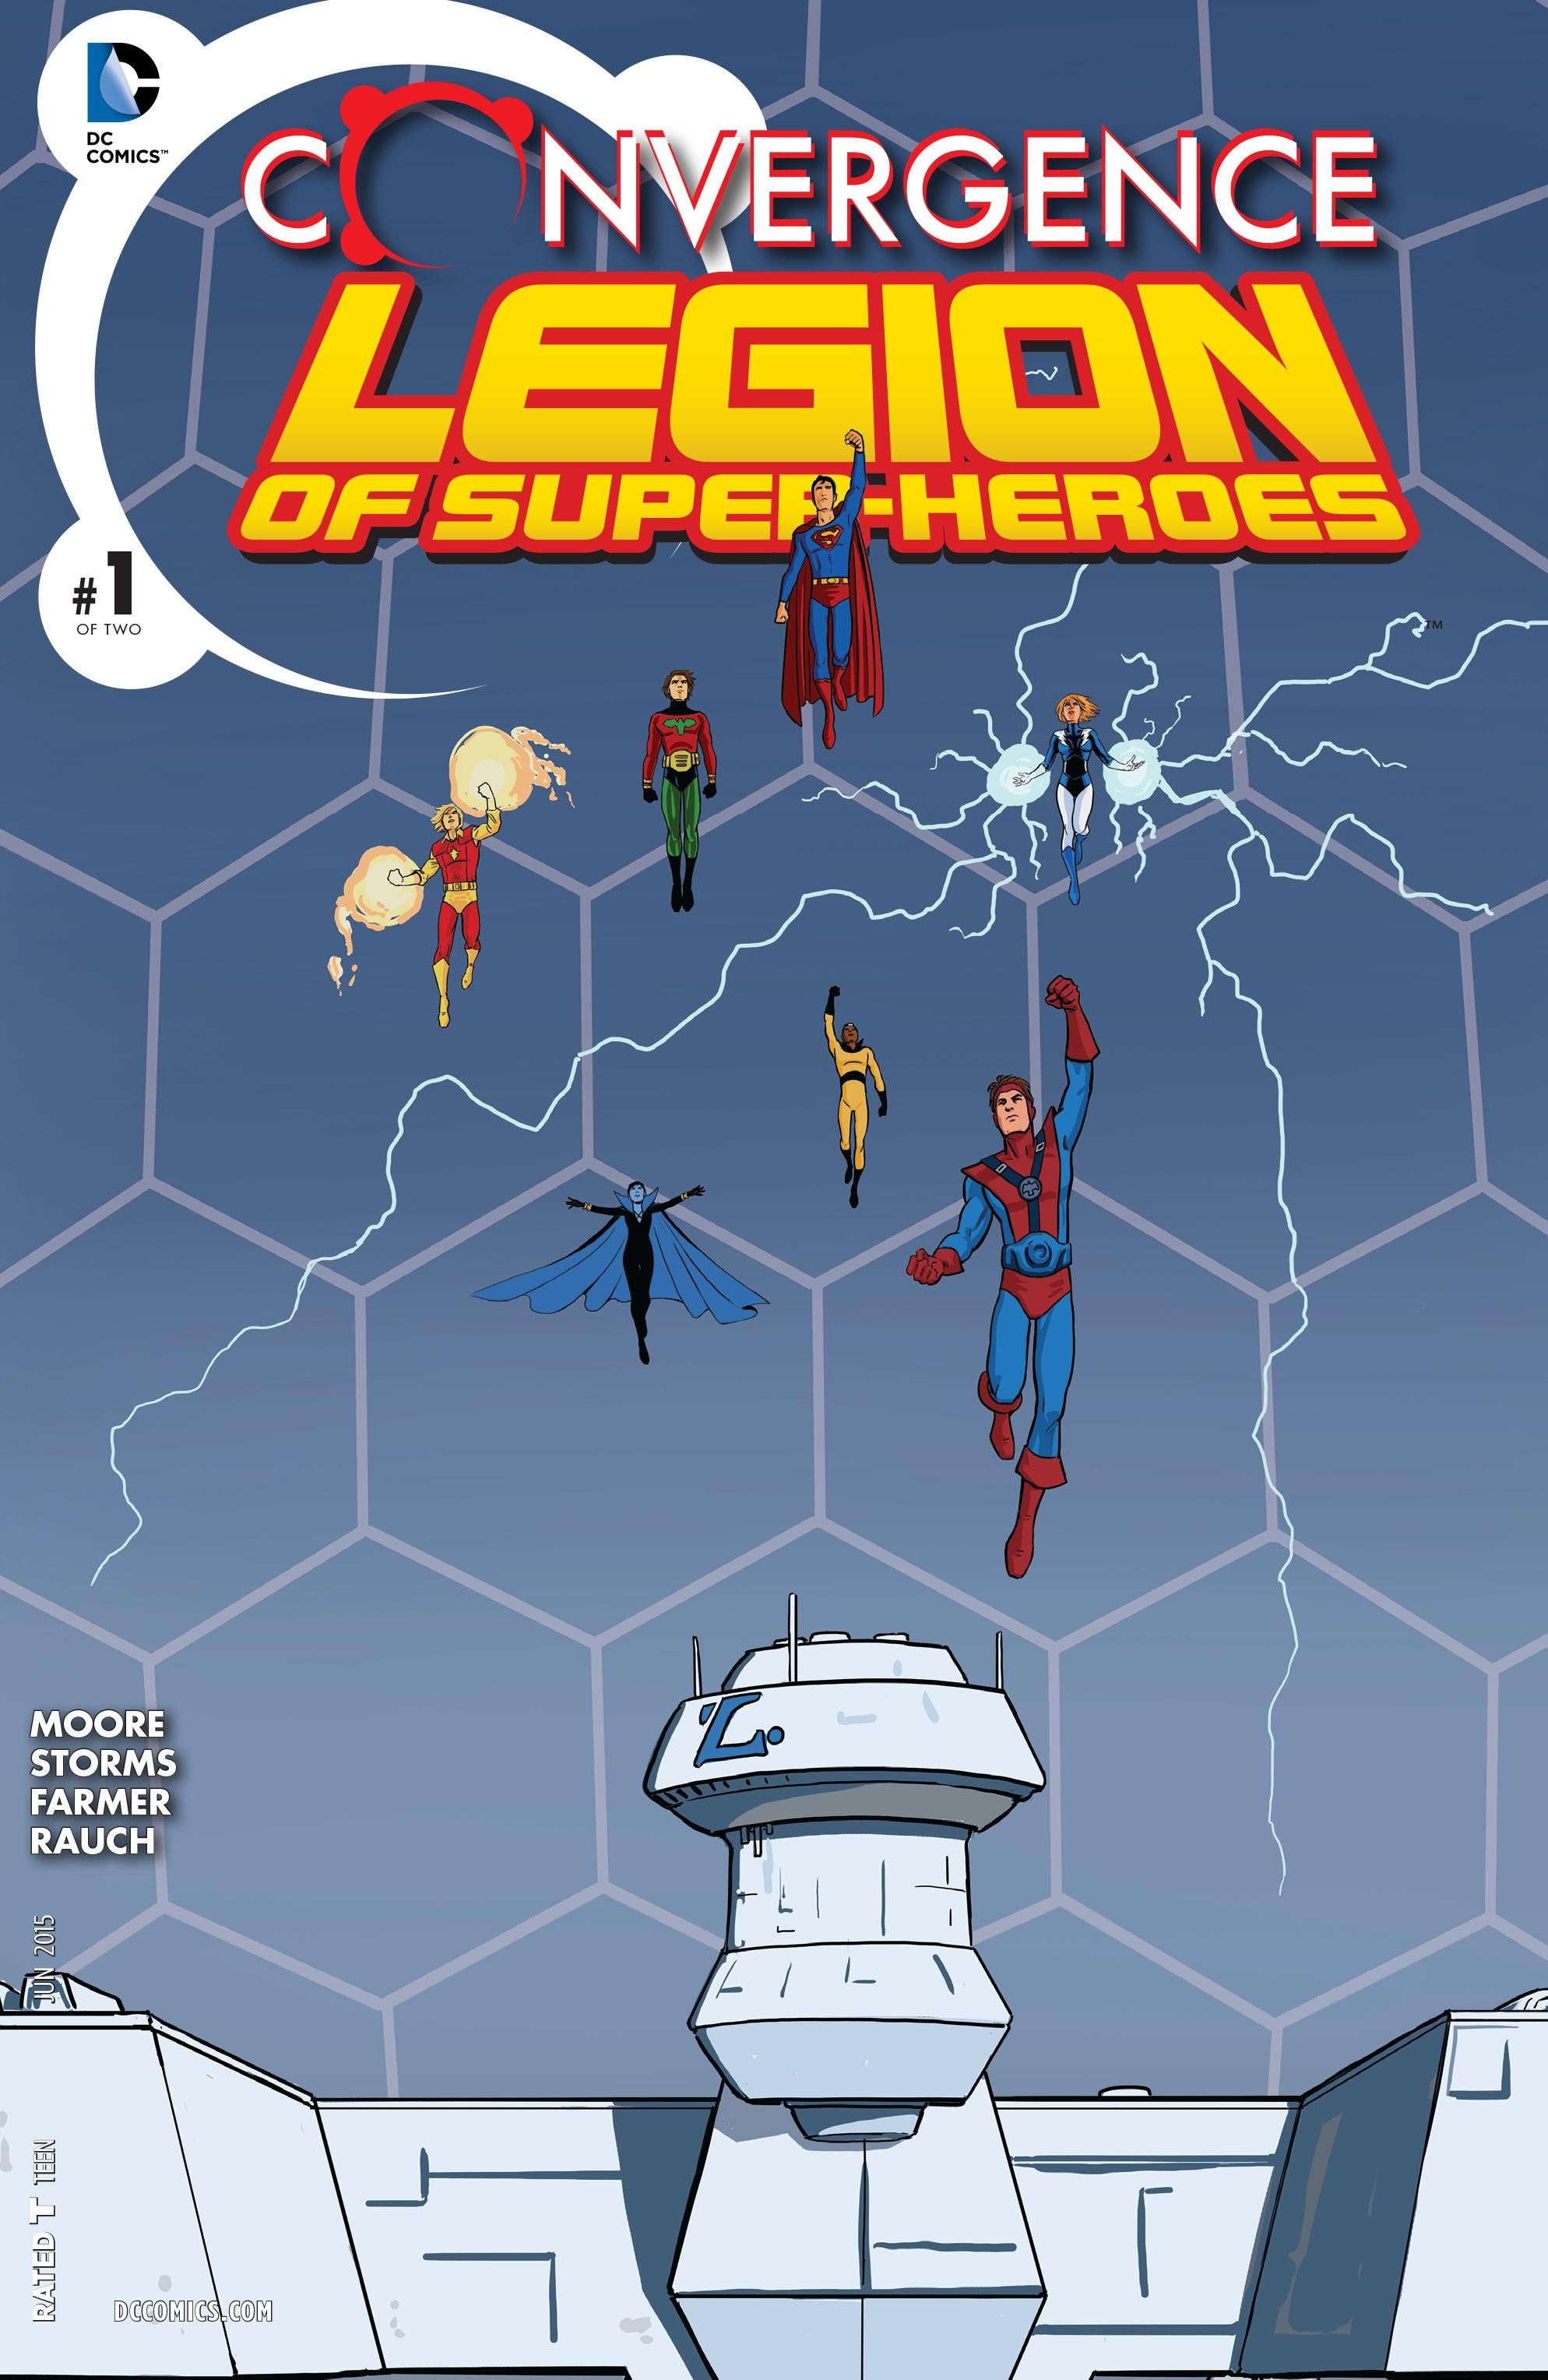 Convergence: Superboy and the Legion of Super-Heroes Vol. 1 #1